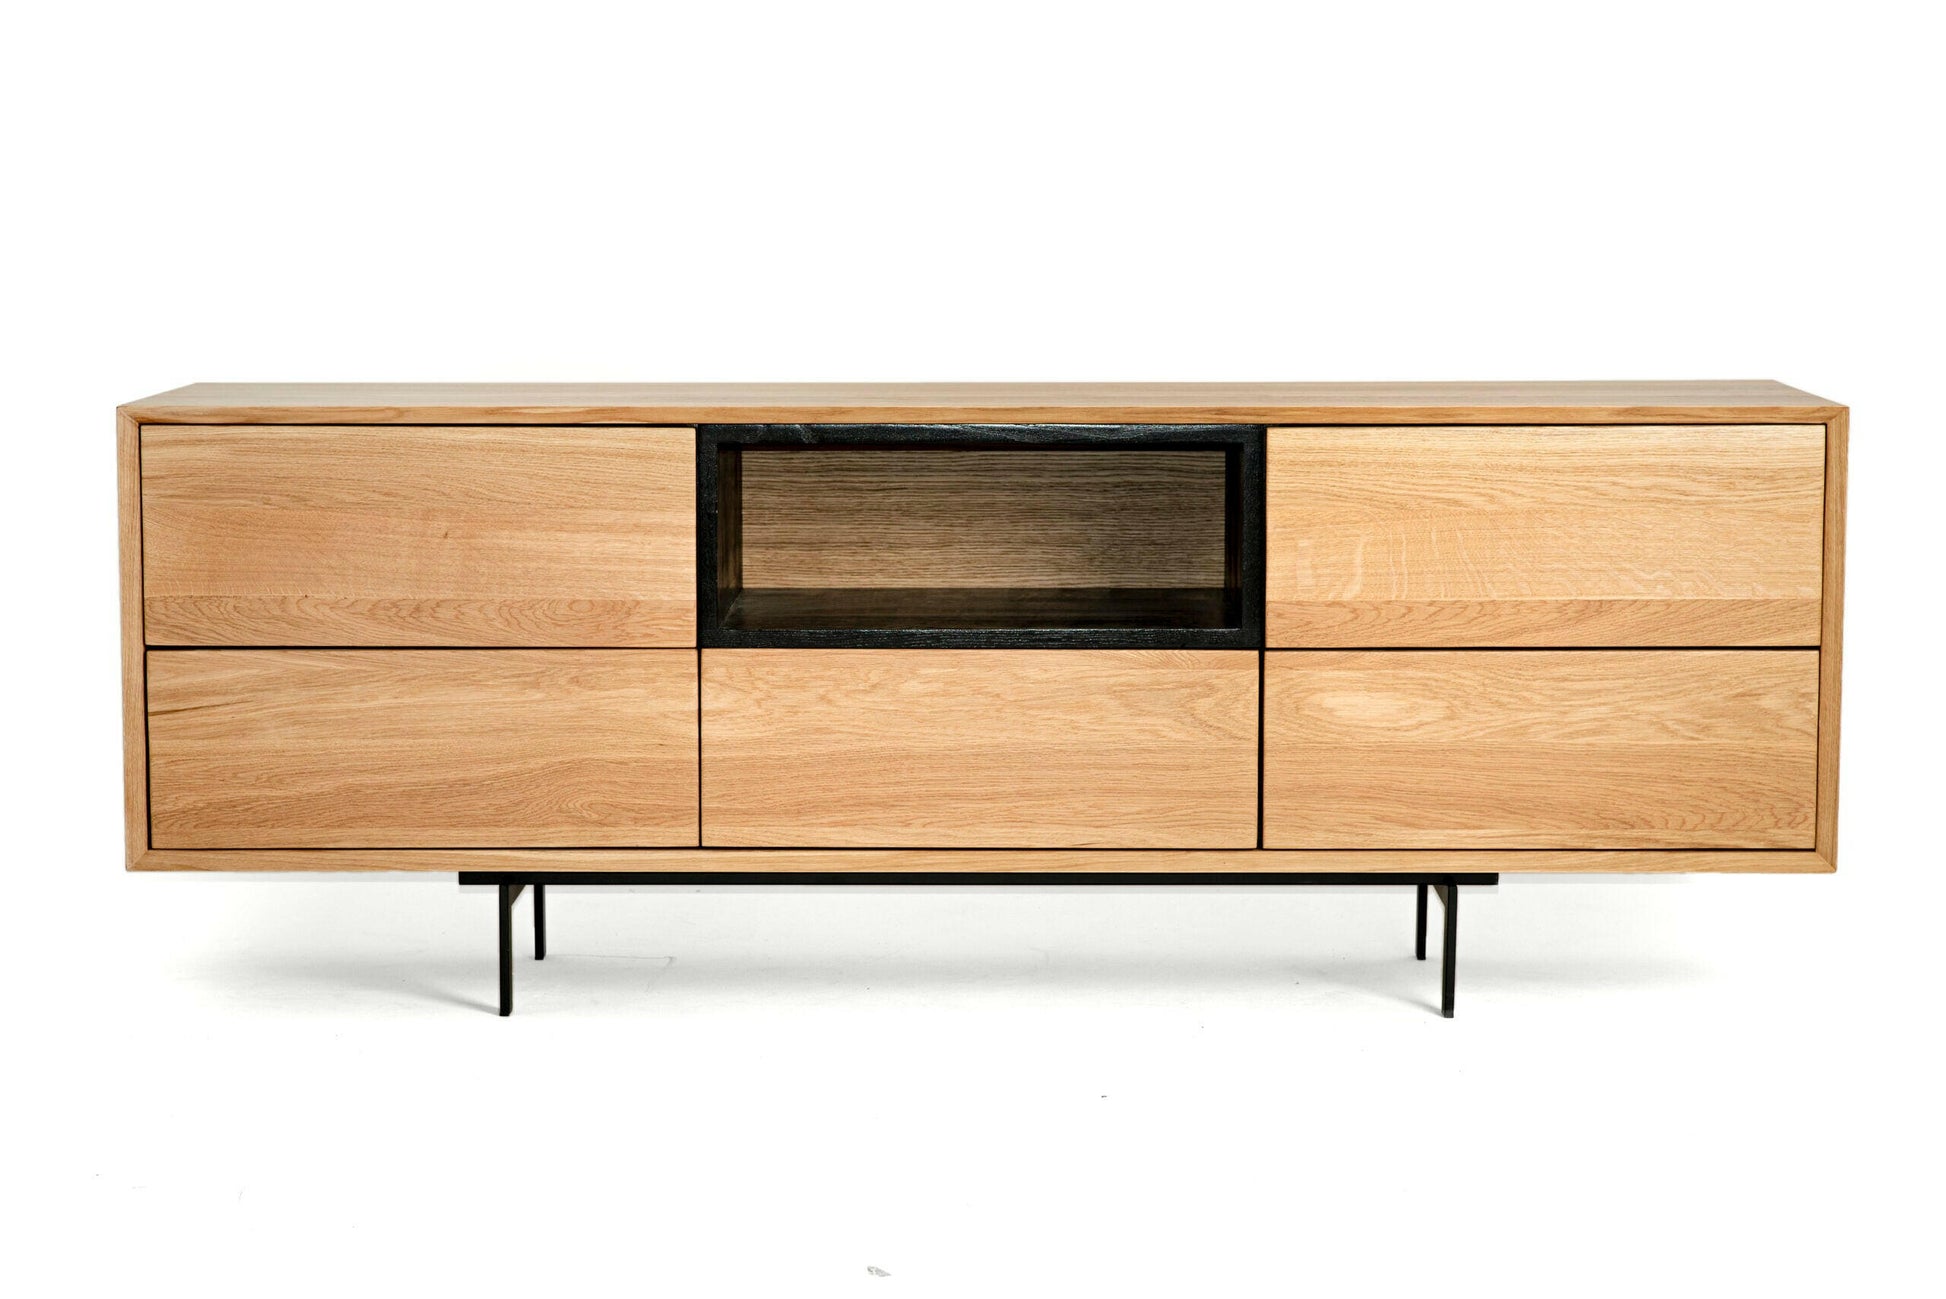 Rosto Chest of Drawers.